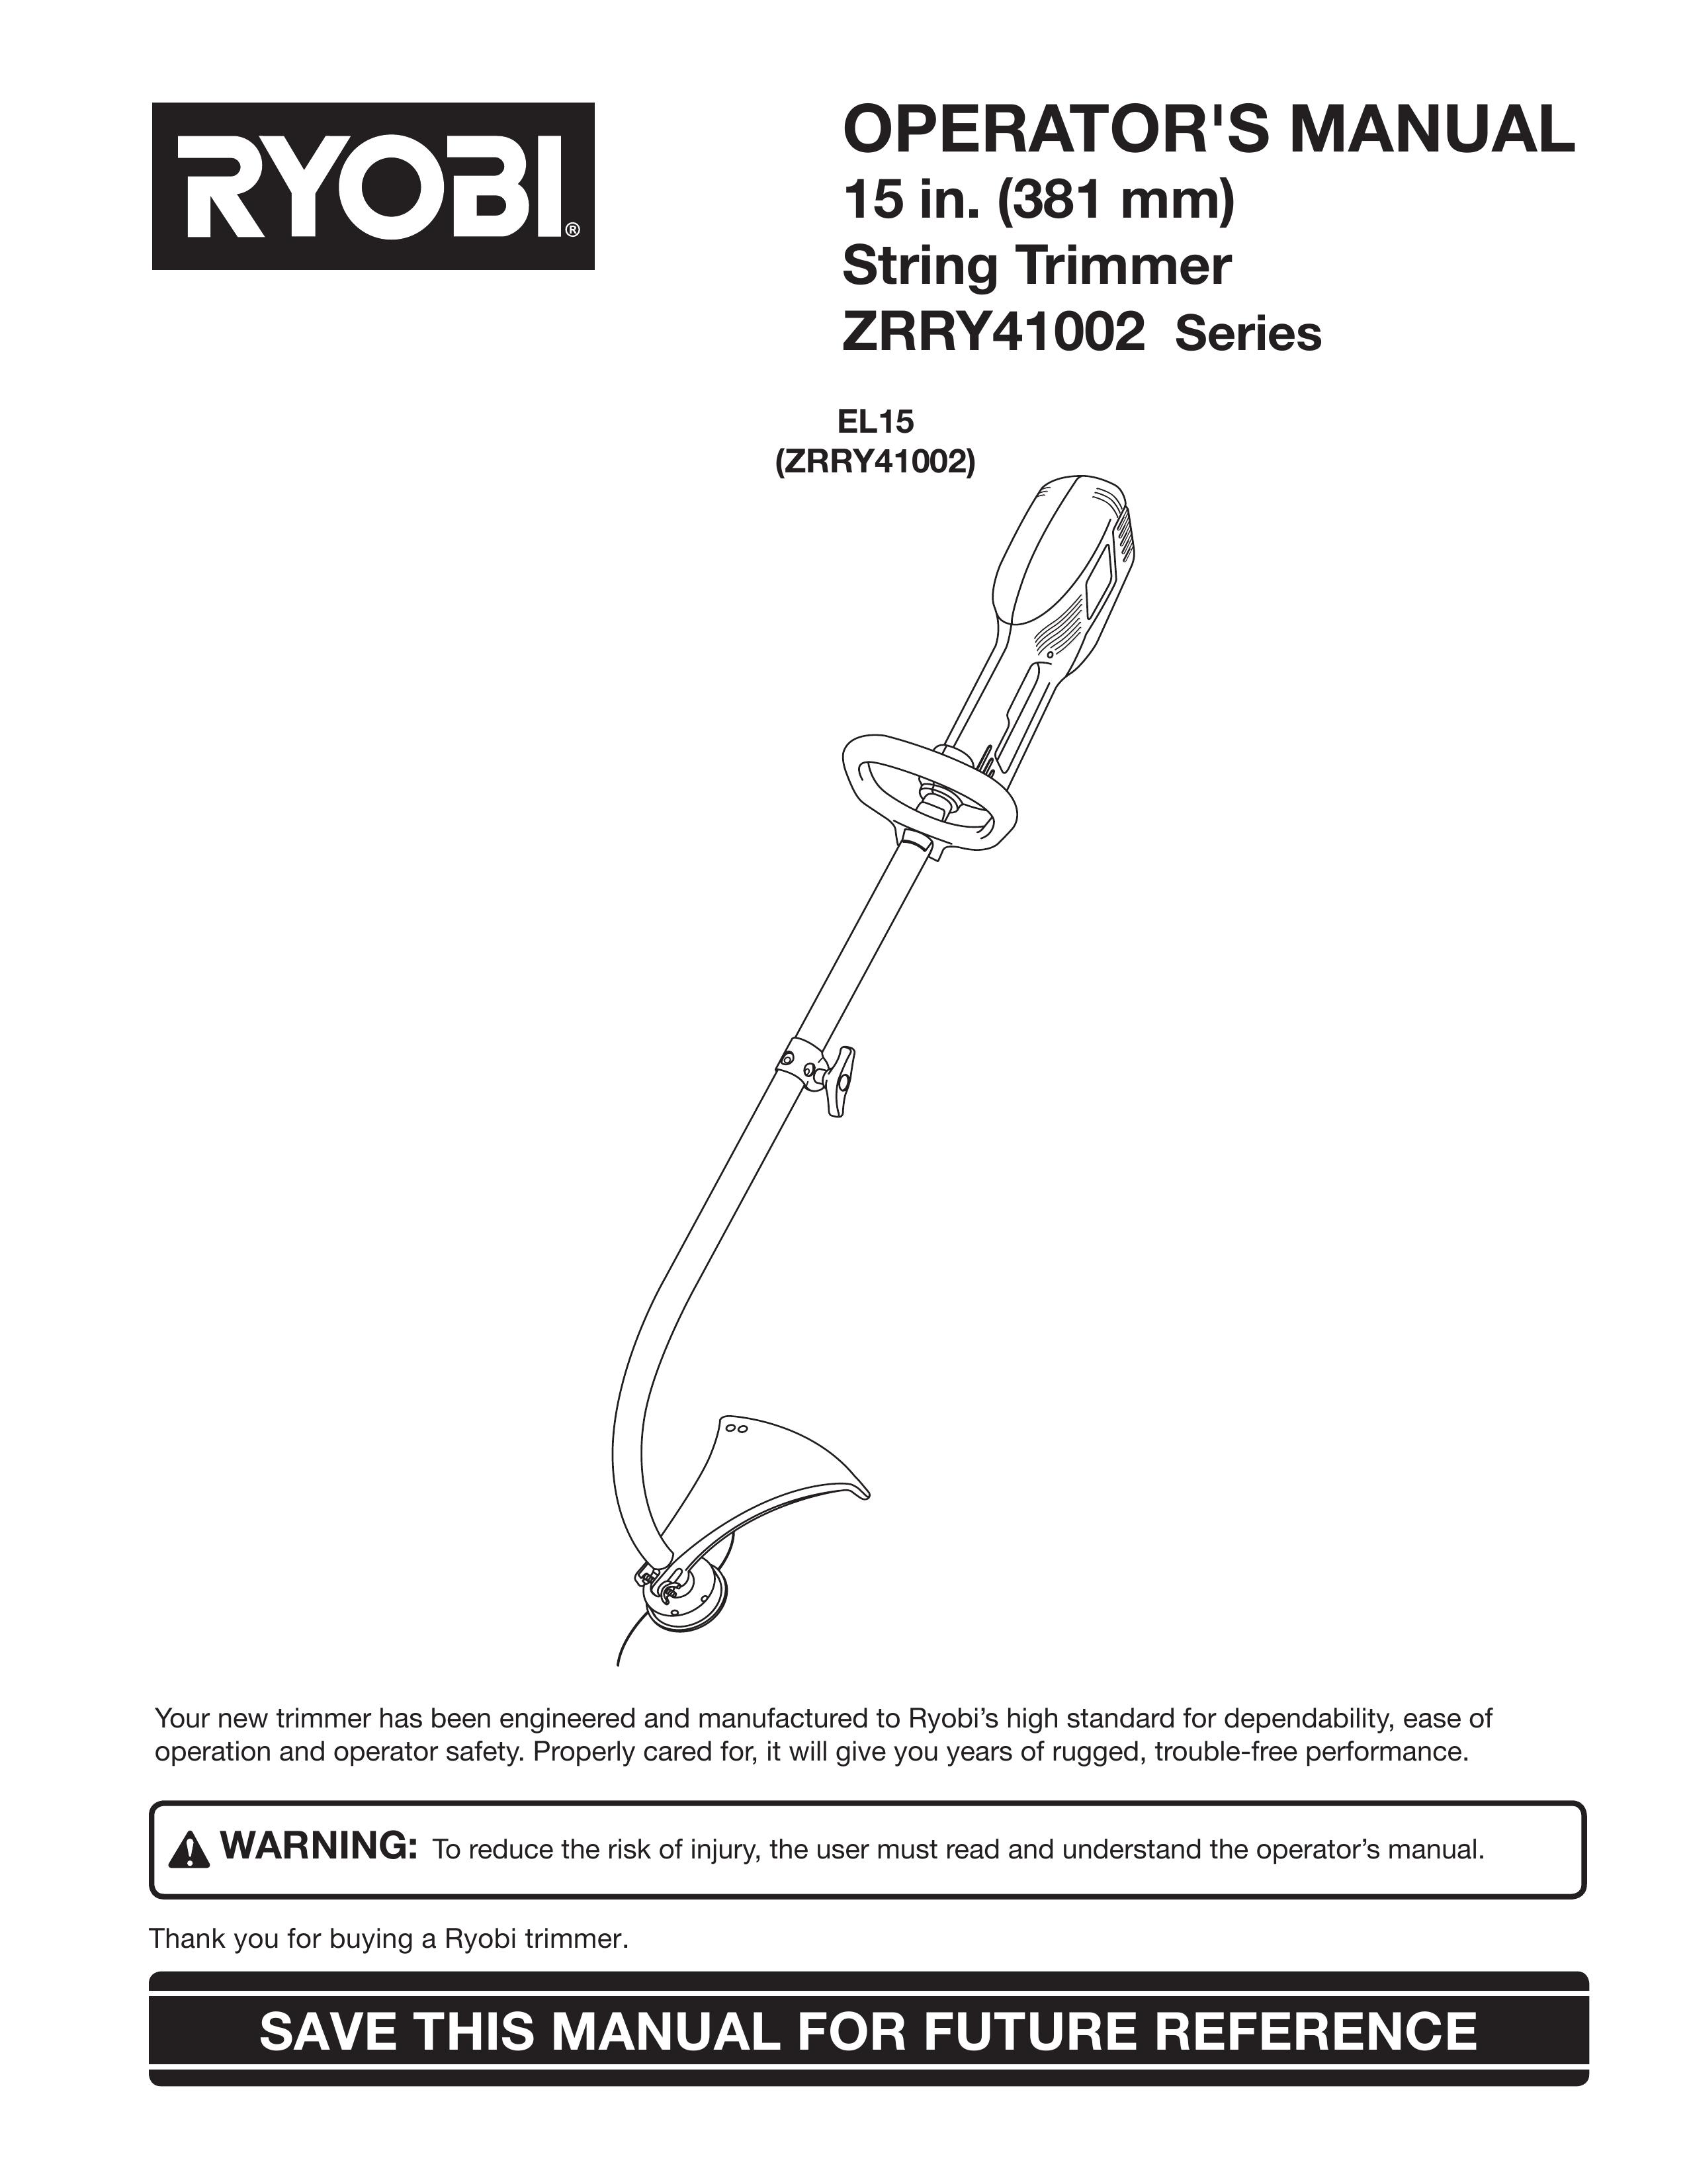 Ryobi Outdoor ZRRY41002 Trimmer User Manual